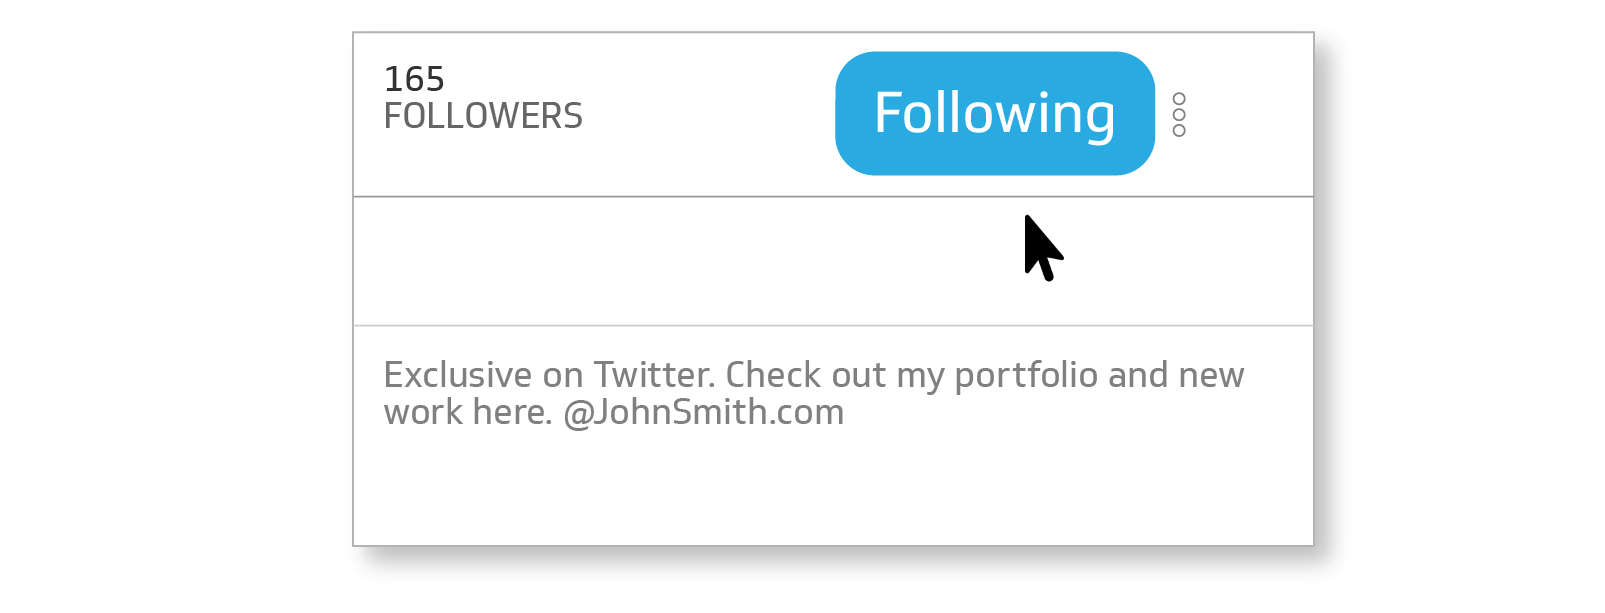 How to turn on mobile notifications on Twitter